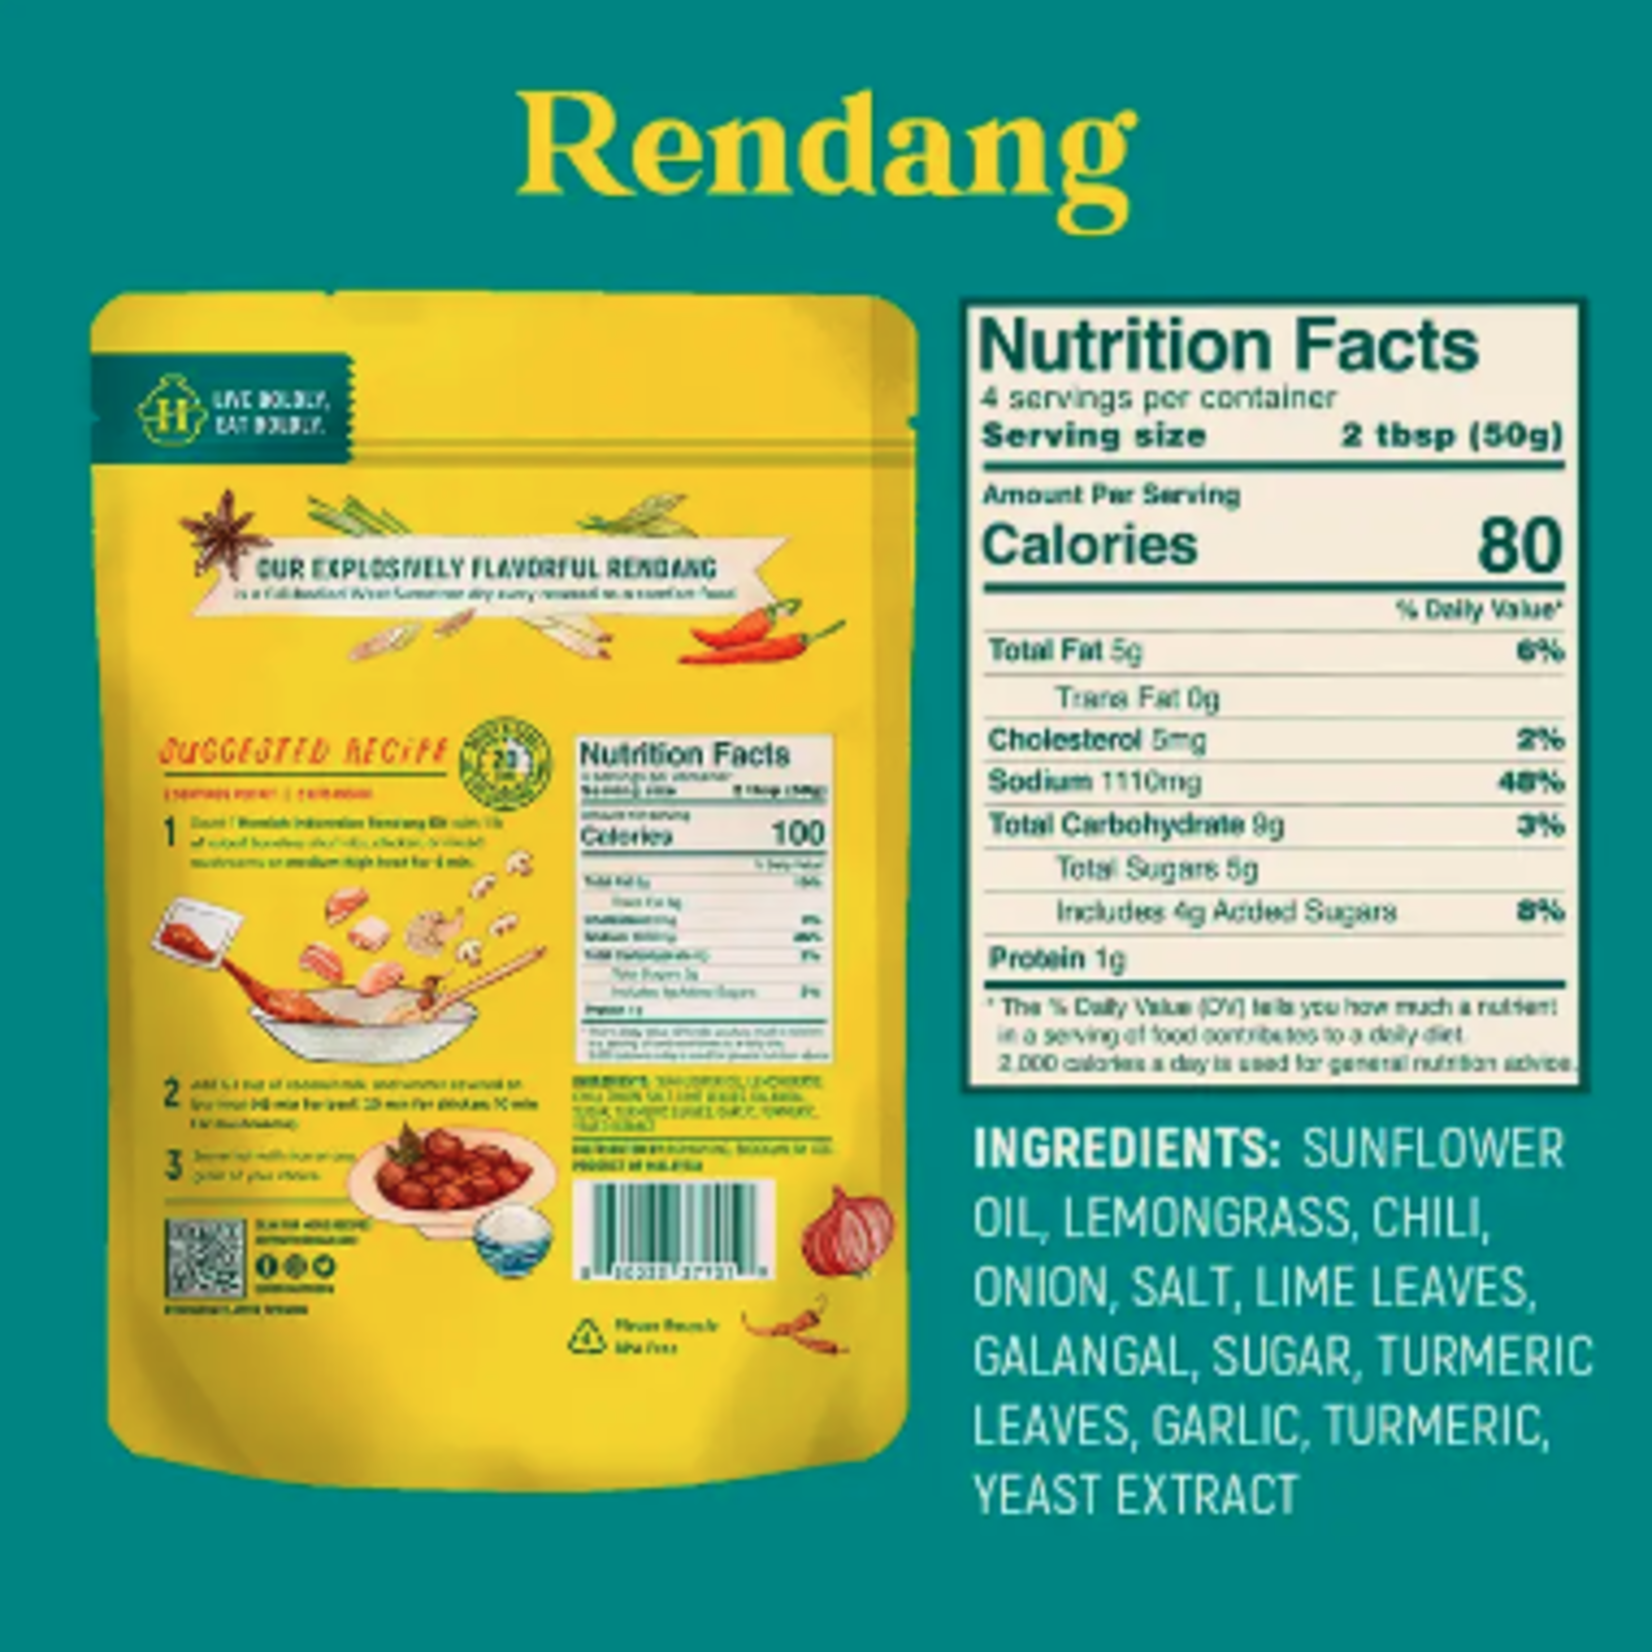 Homiah Indonesian Rendang Curry Paste/ Spice Kit, 7 oz